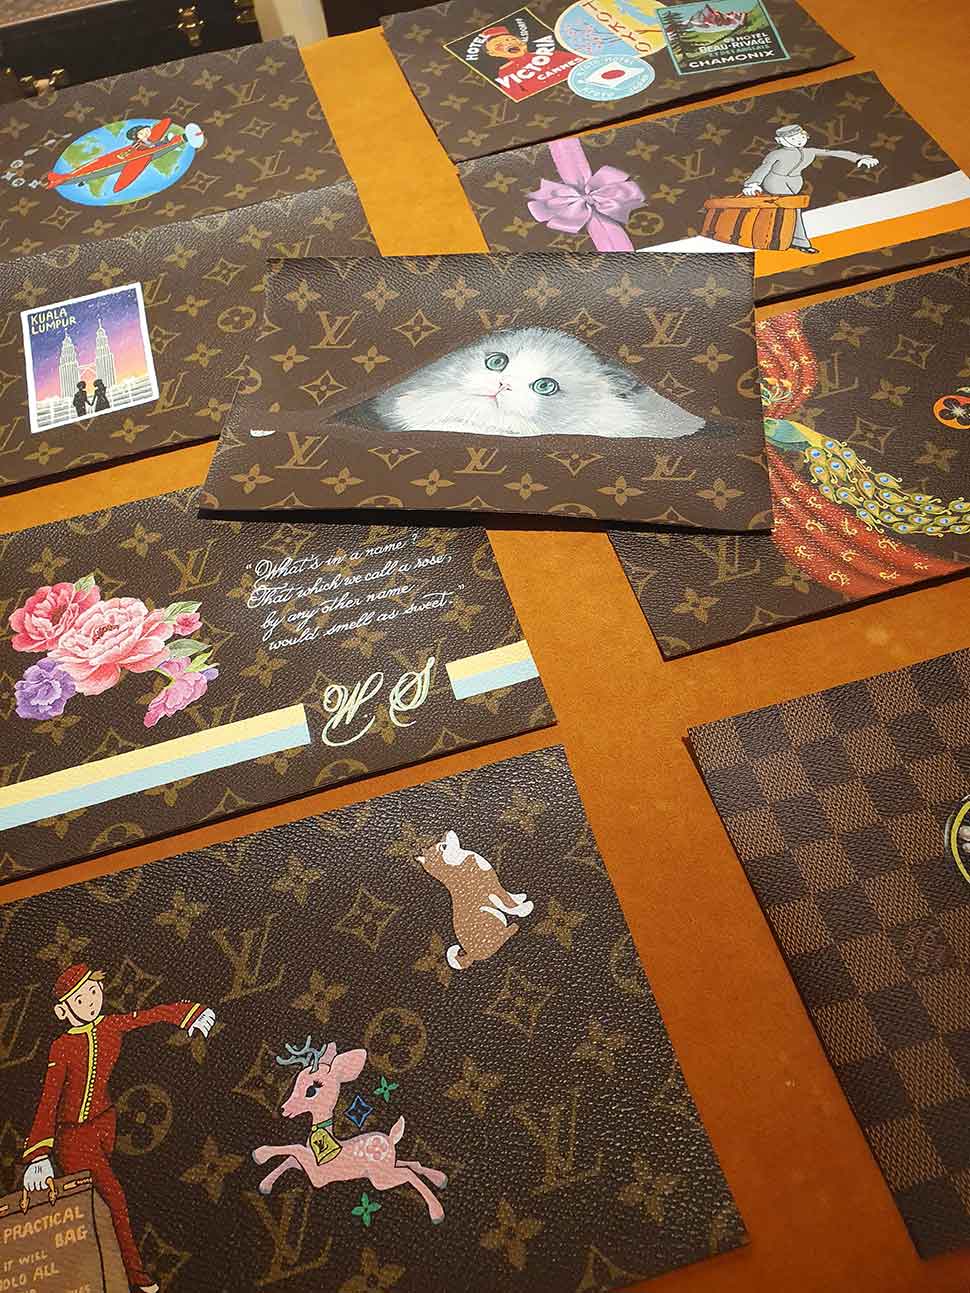 LV customized with hand painted art & add-ons